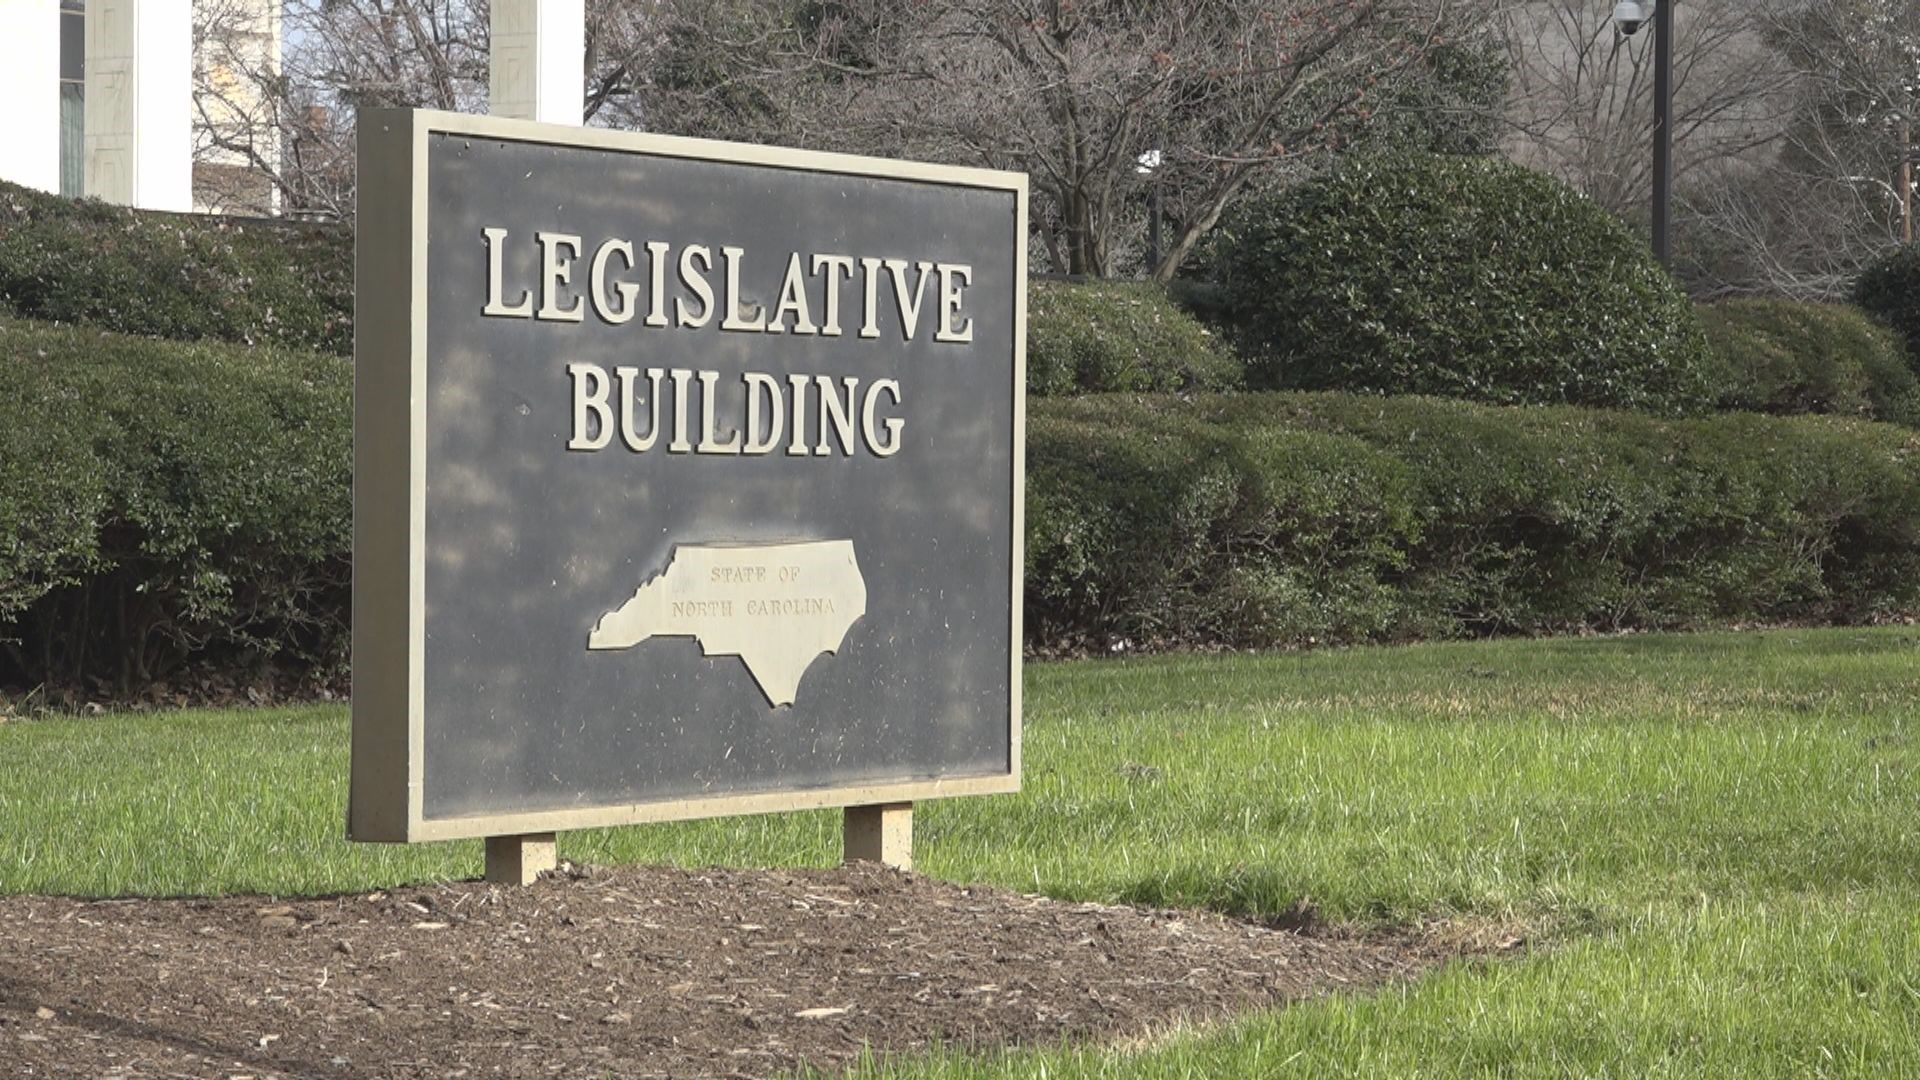 North Carolina lawmakers are trying to figure out how to spend the money sent from the federal government.